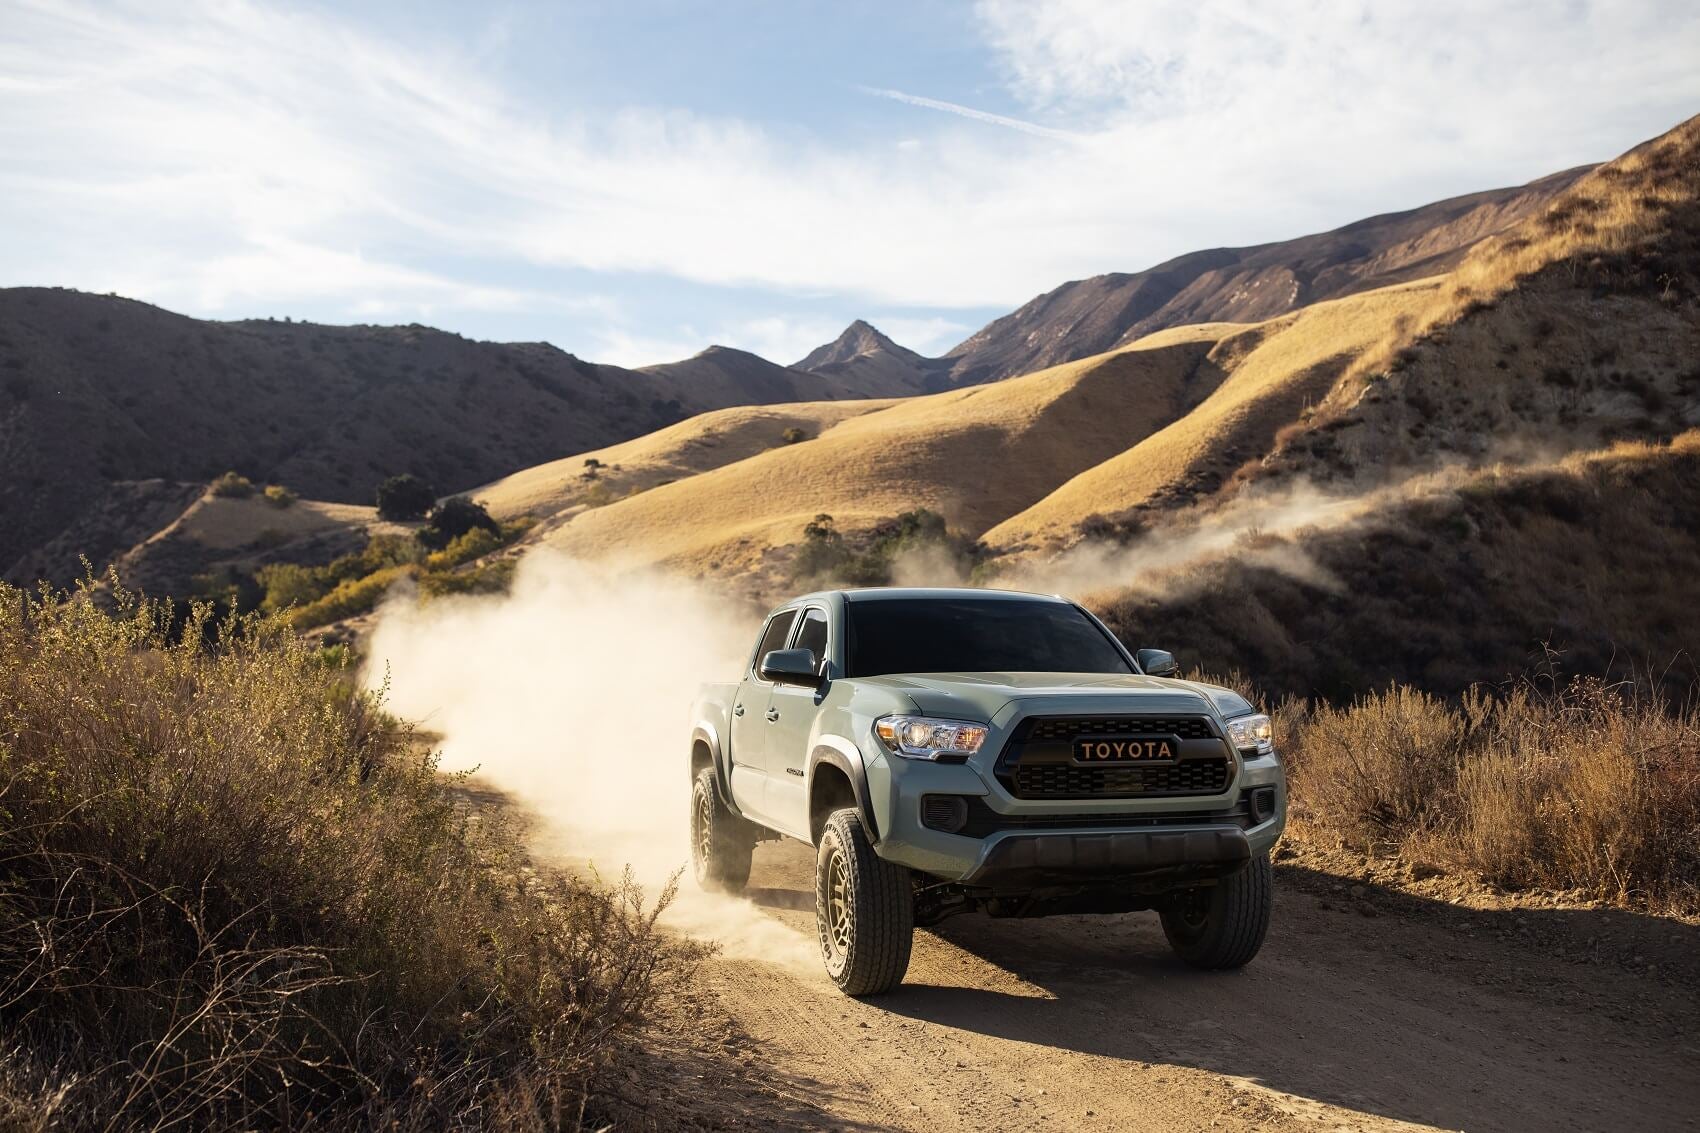 2022 Toyota Tacoma in the Desert